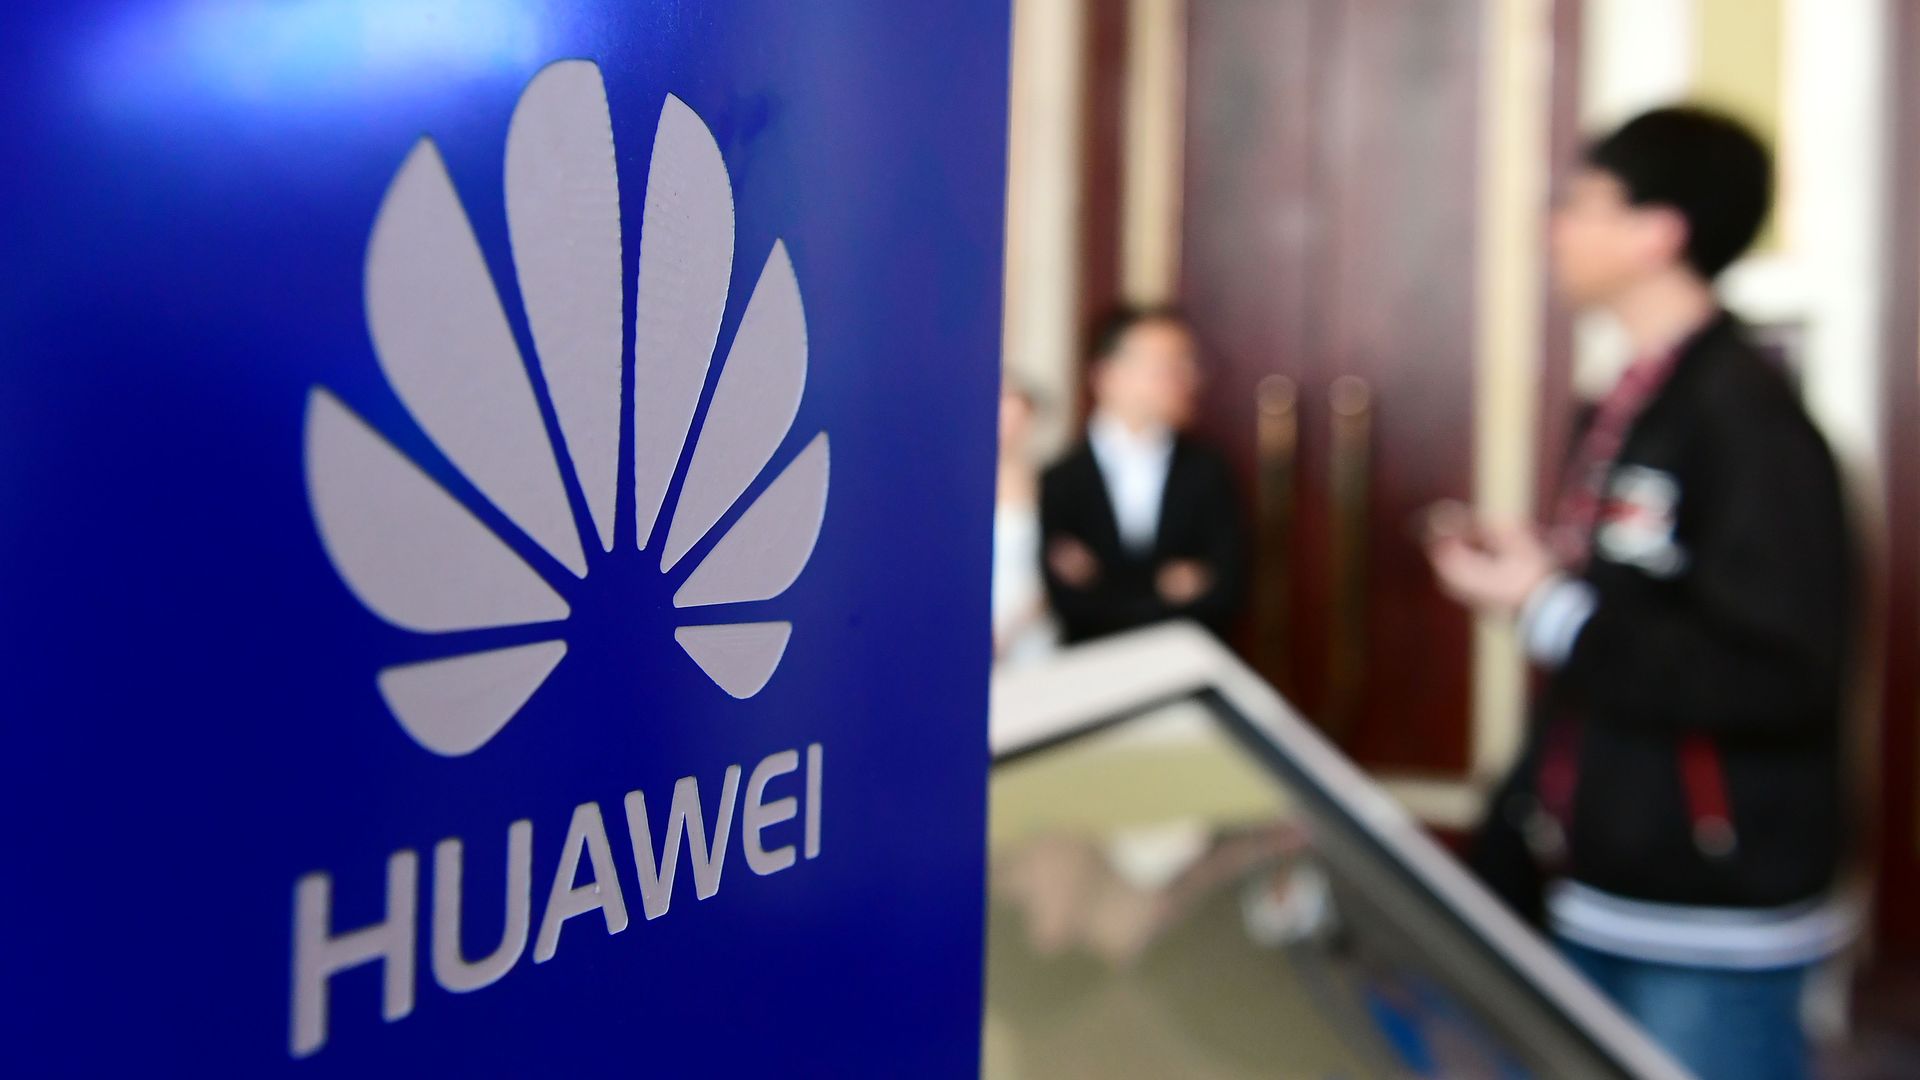 A sign with the Huawei logo